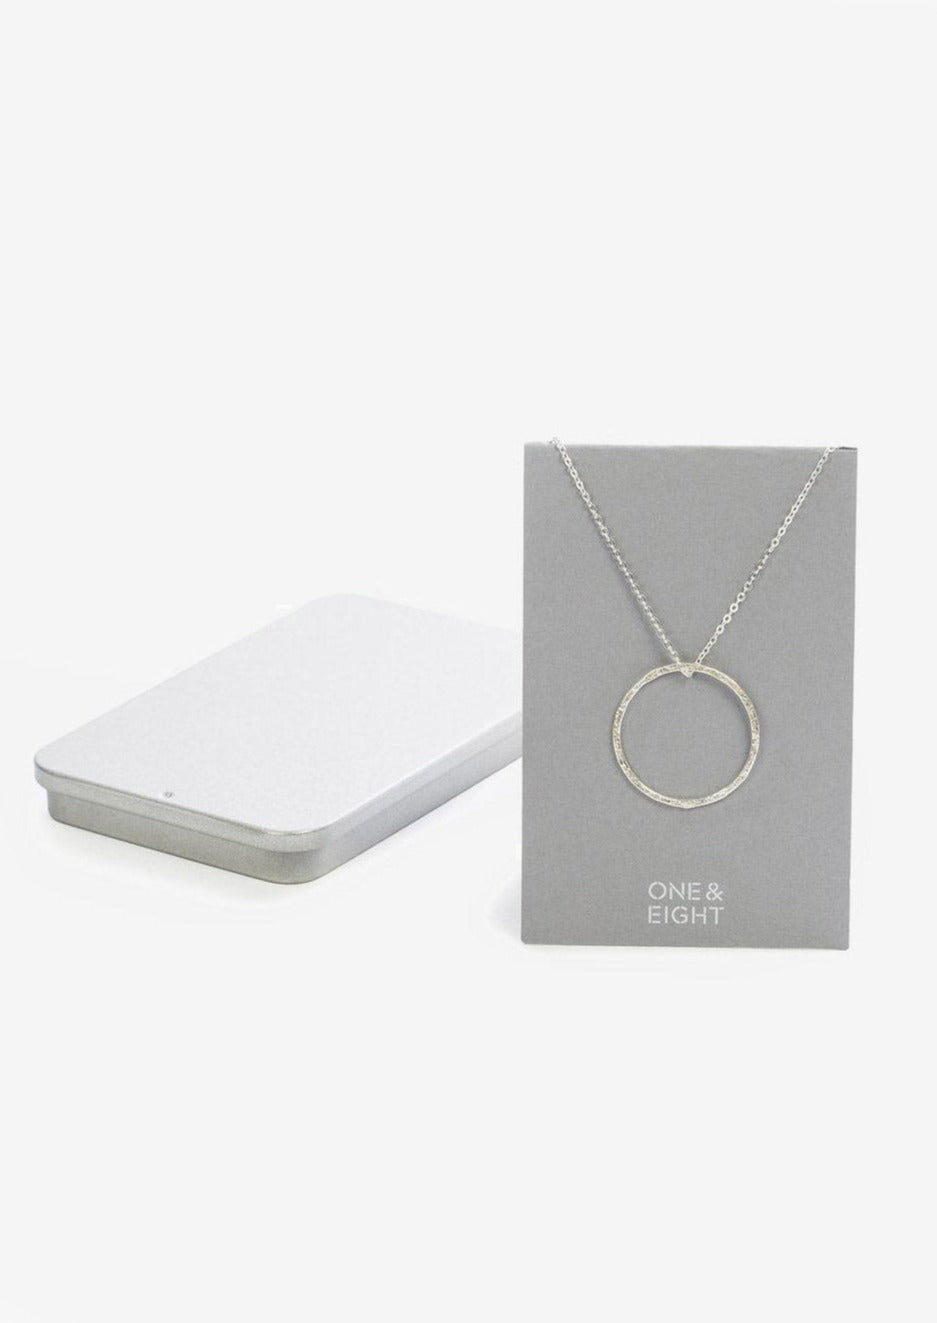 Silver Hammered Hoop Necklace by One & Eight